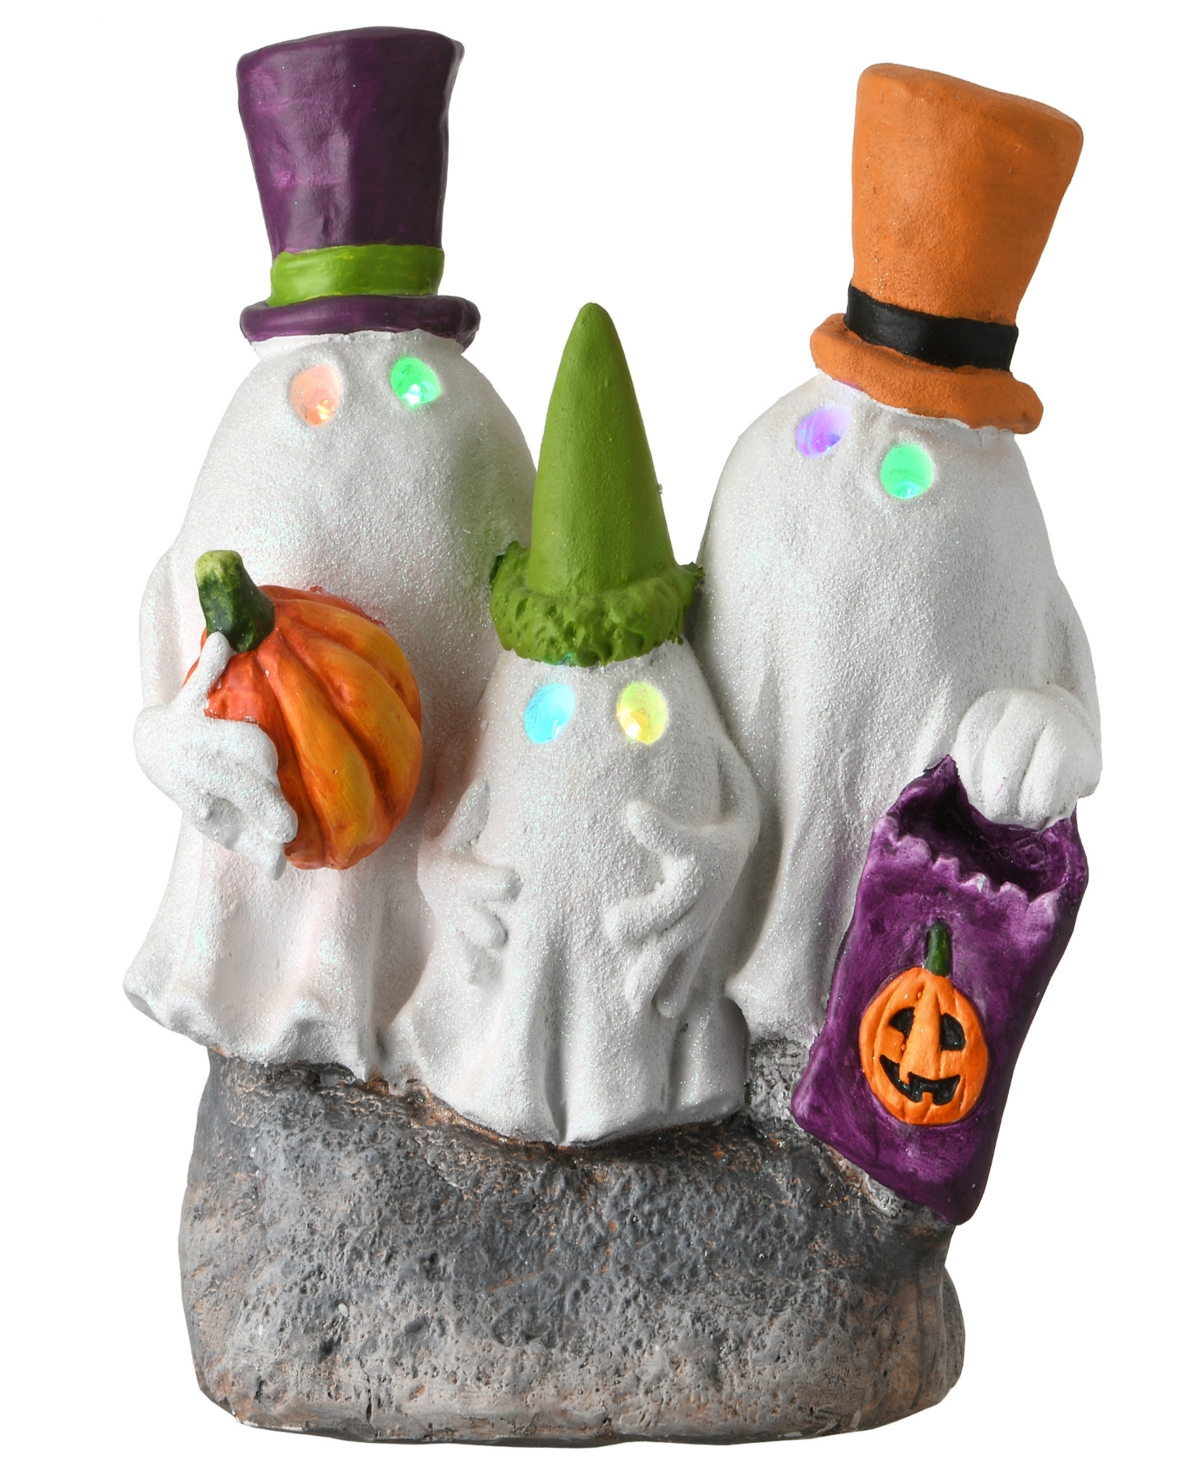 15" Trick Or Treating Ghosts Decoration, Led Lights, Halloween Collection - White